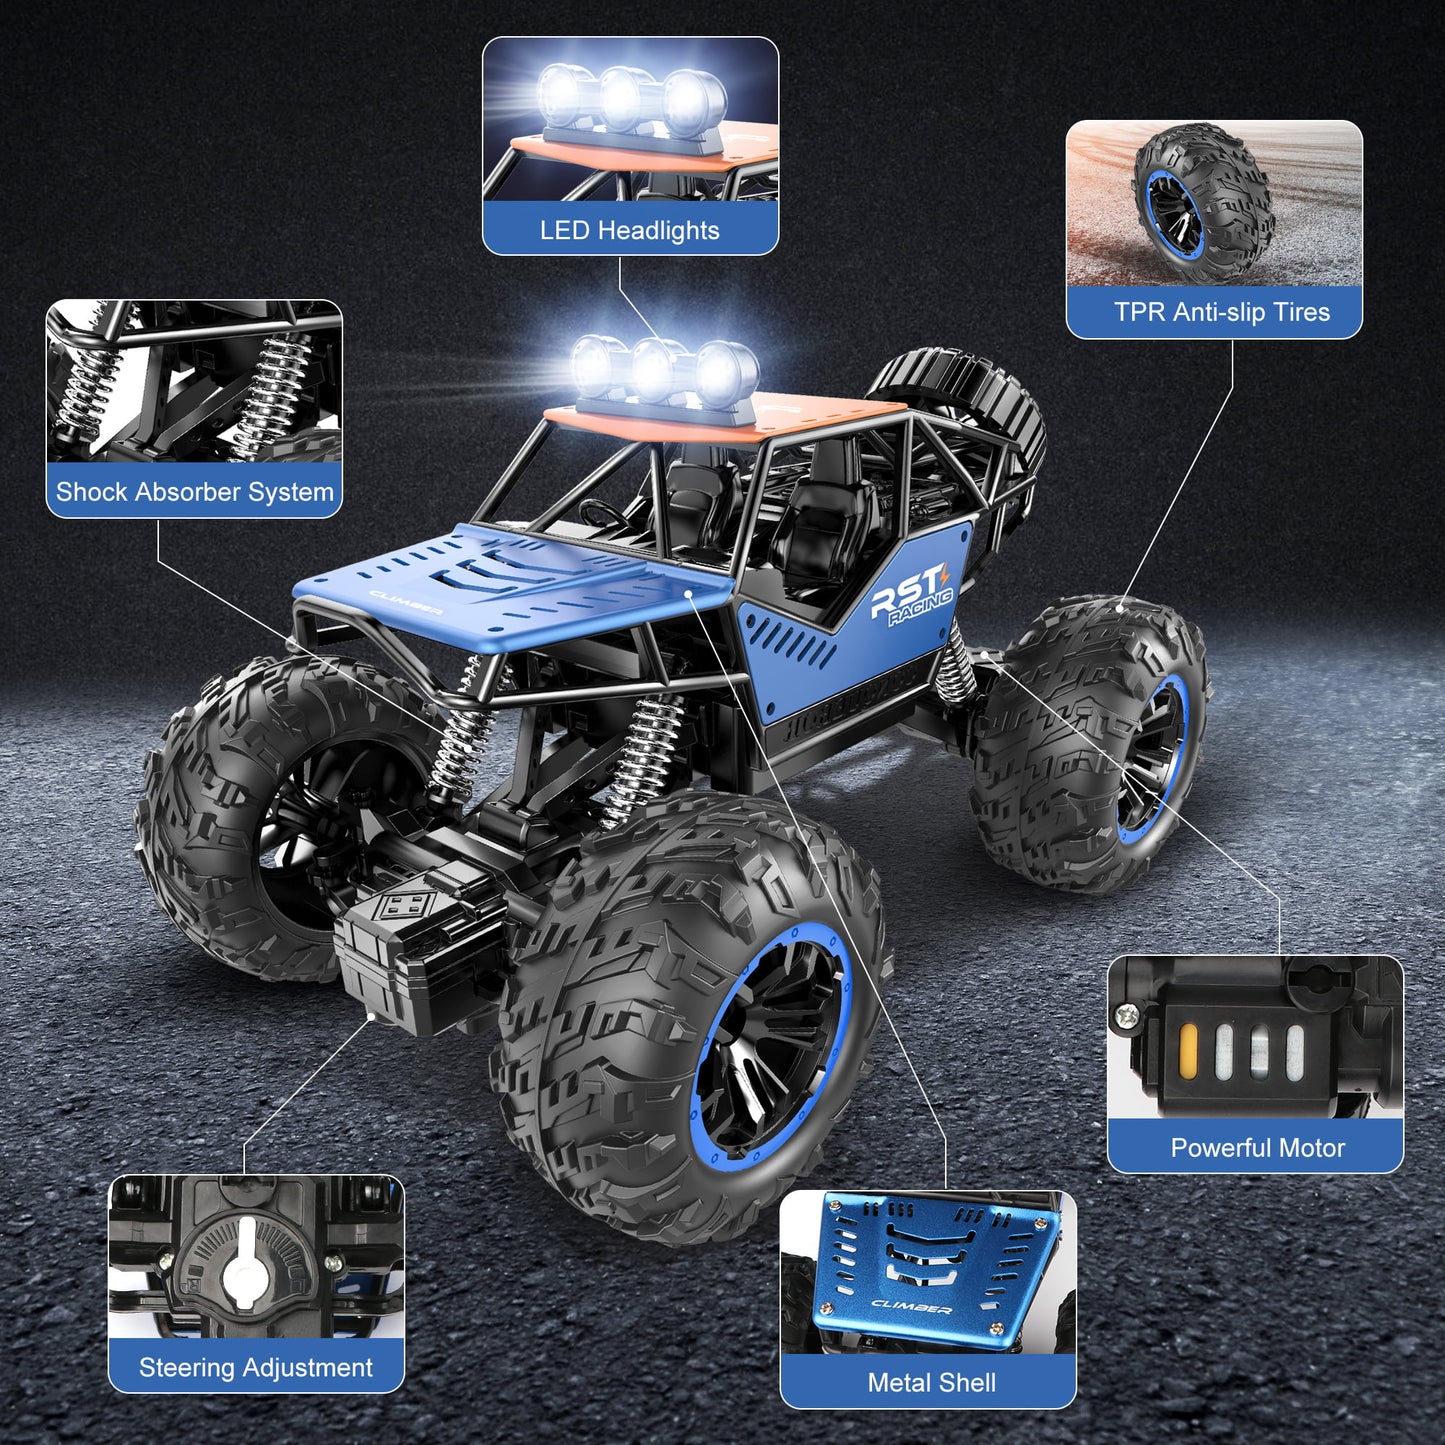 Blue Remote Control Cars 1:18, All Terrain Metal Shell 4X4 Off-Road Vehicle Monster Truck, High Speed 2.4 GHz RC Car Christmas Gift for Kids 6+ & Adults